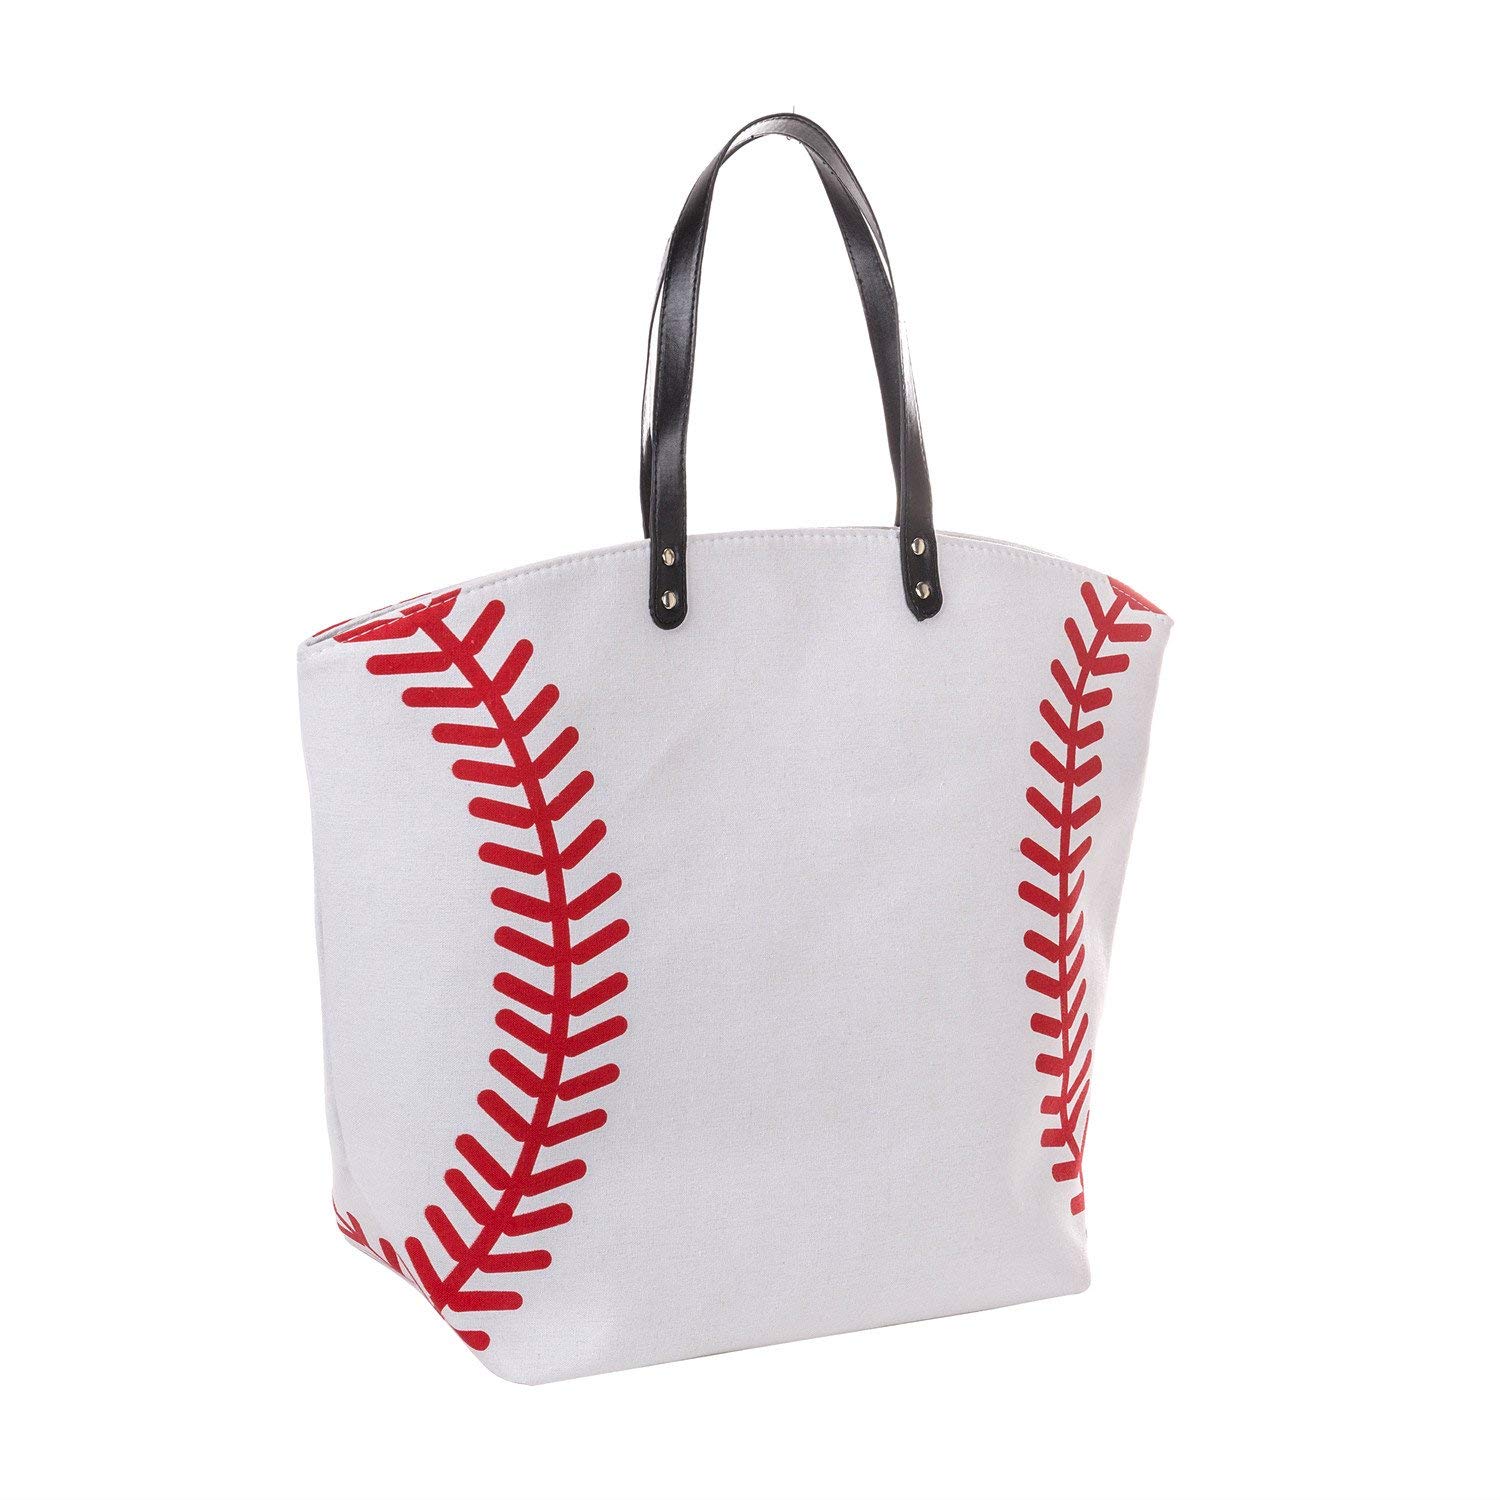 Wholesale White Tote For Sublimation, Sublimation Blank, Blank Bag